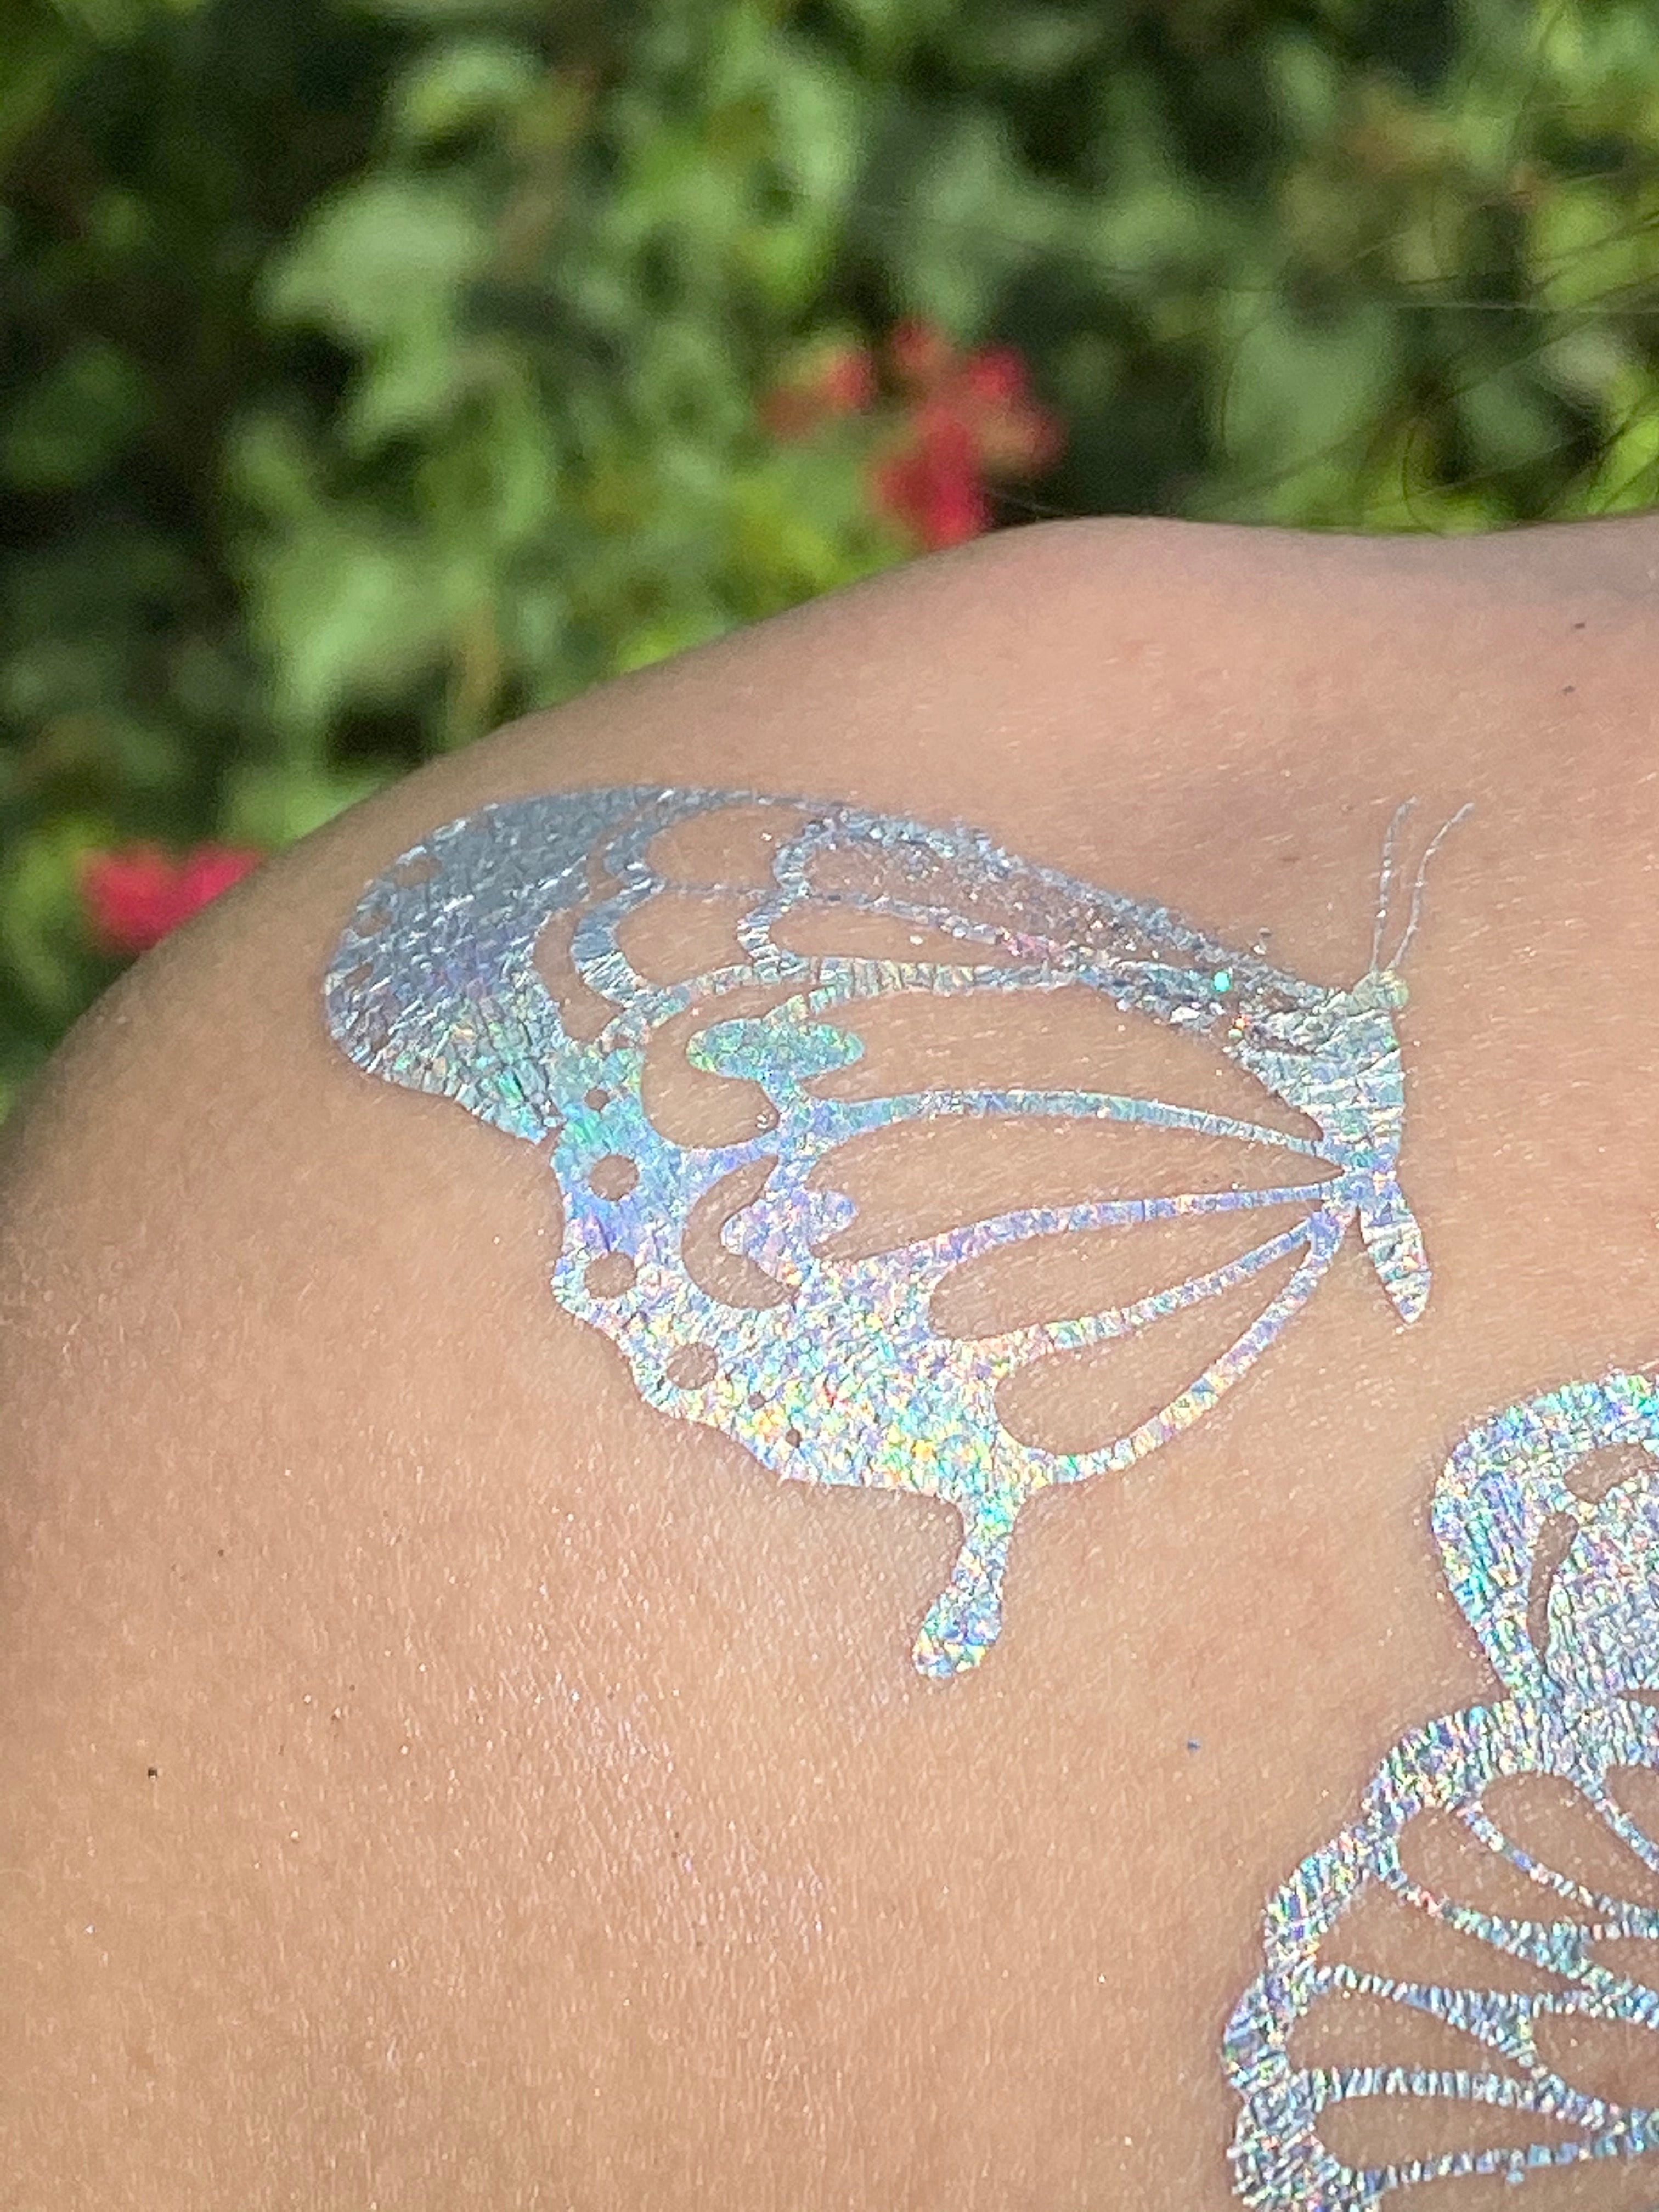 3D Holographic 👽 Photosynthetic Tattoo, Floral Vine and Plumeria Pattern  Tattoed on Human; Photographed on Space 👽 Camera Technology - AI Generated  Artwork - NightCafe Creator